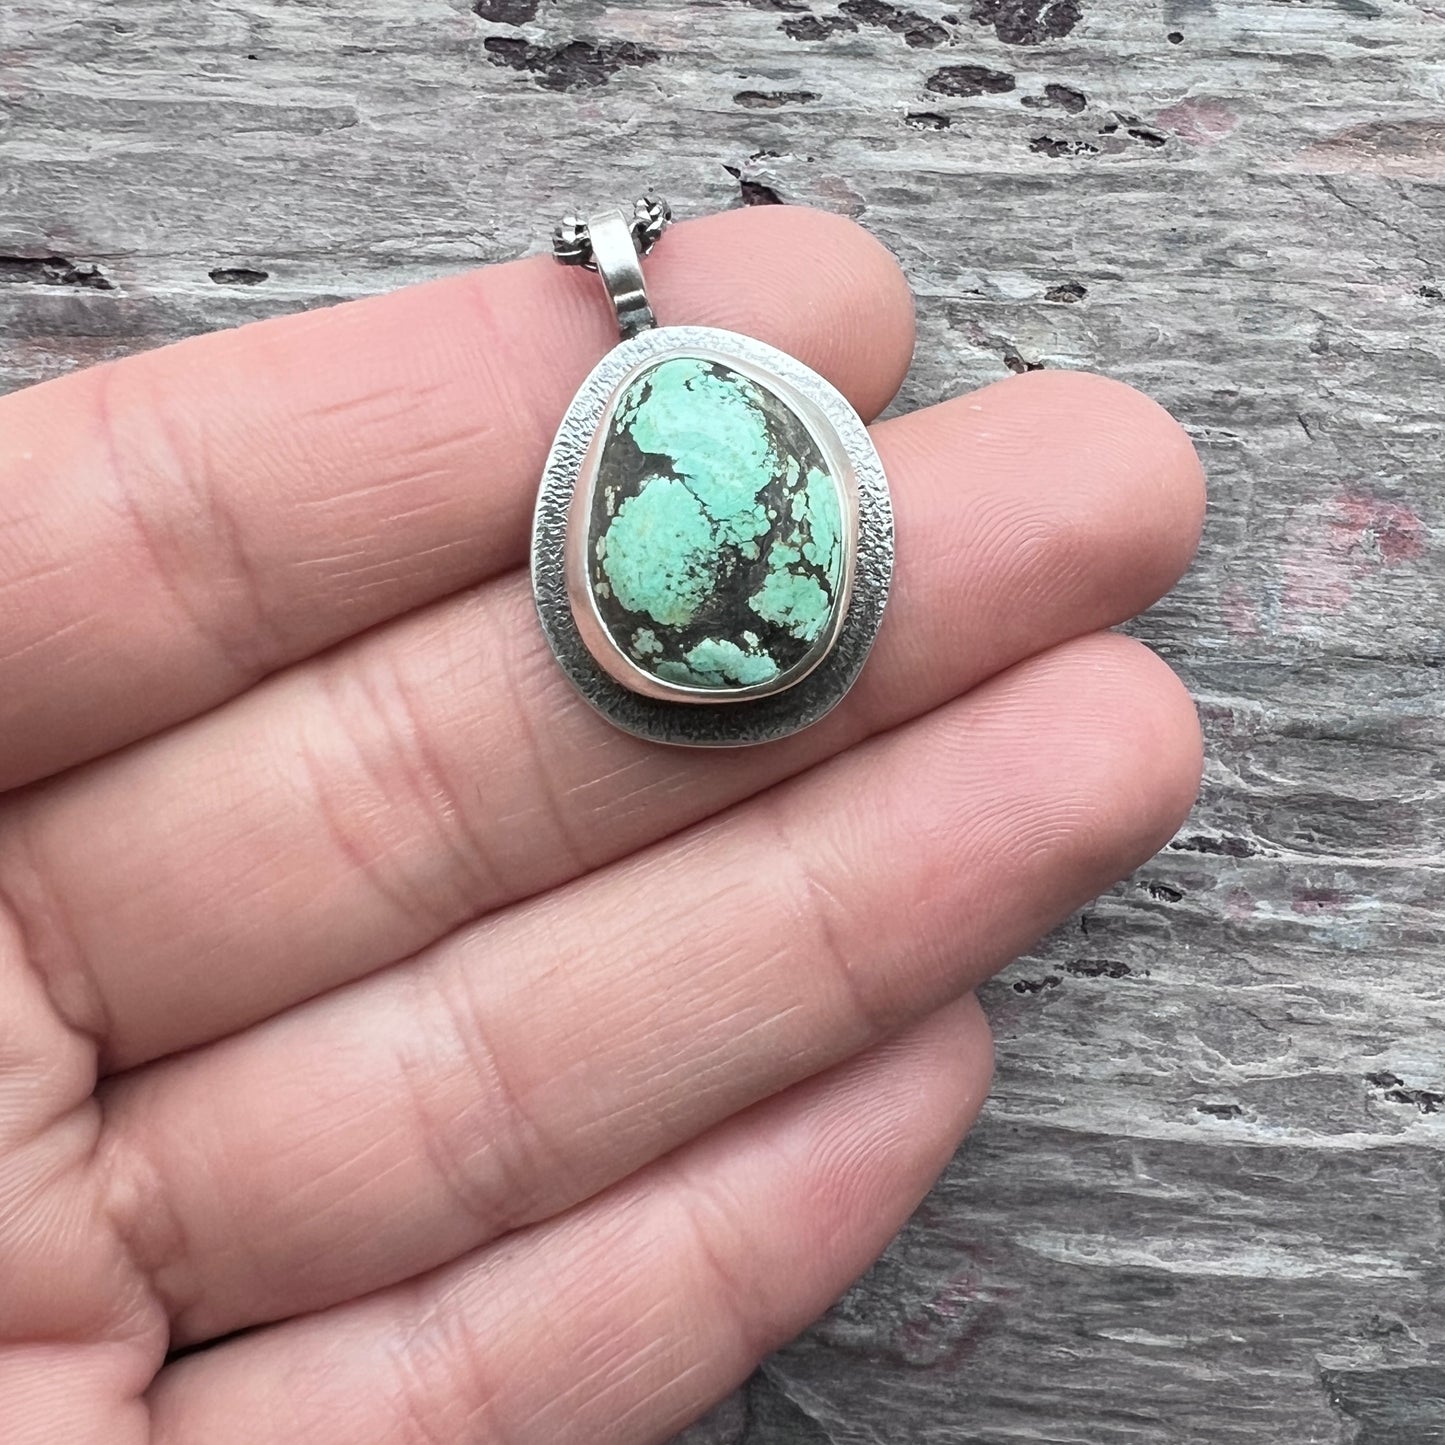 Sterling Silver Turquoise Necklace | Freeform Genuine Turquoise Pendant